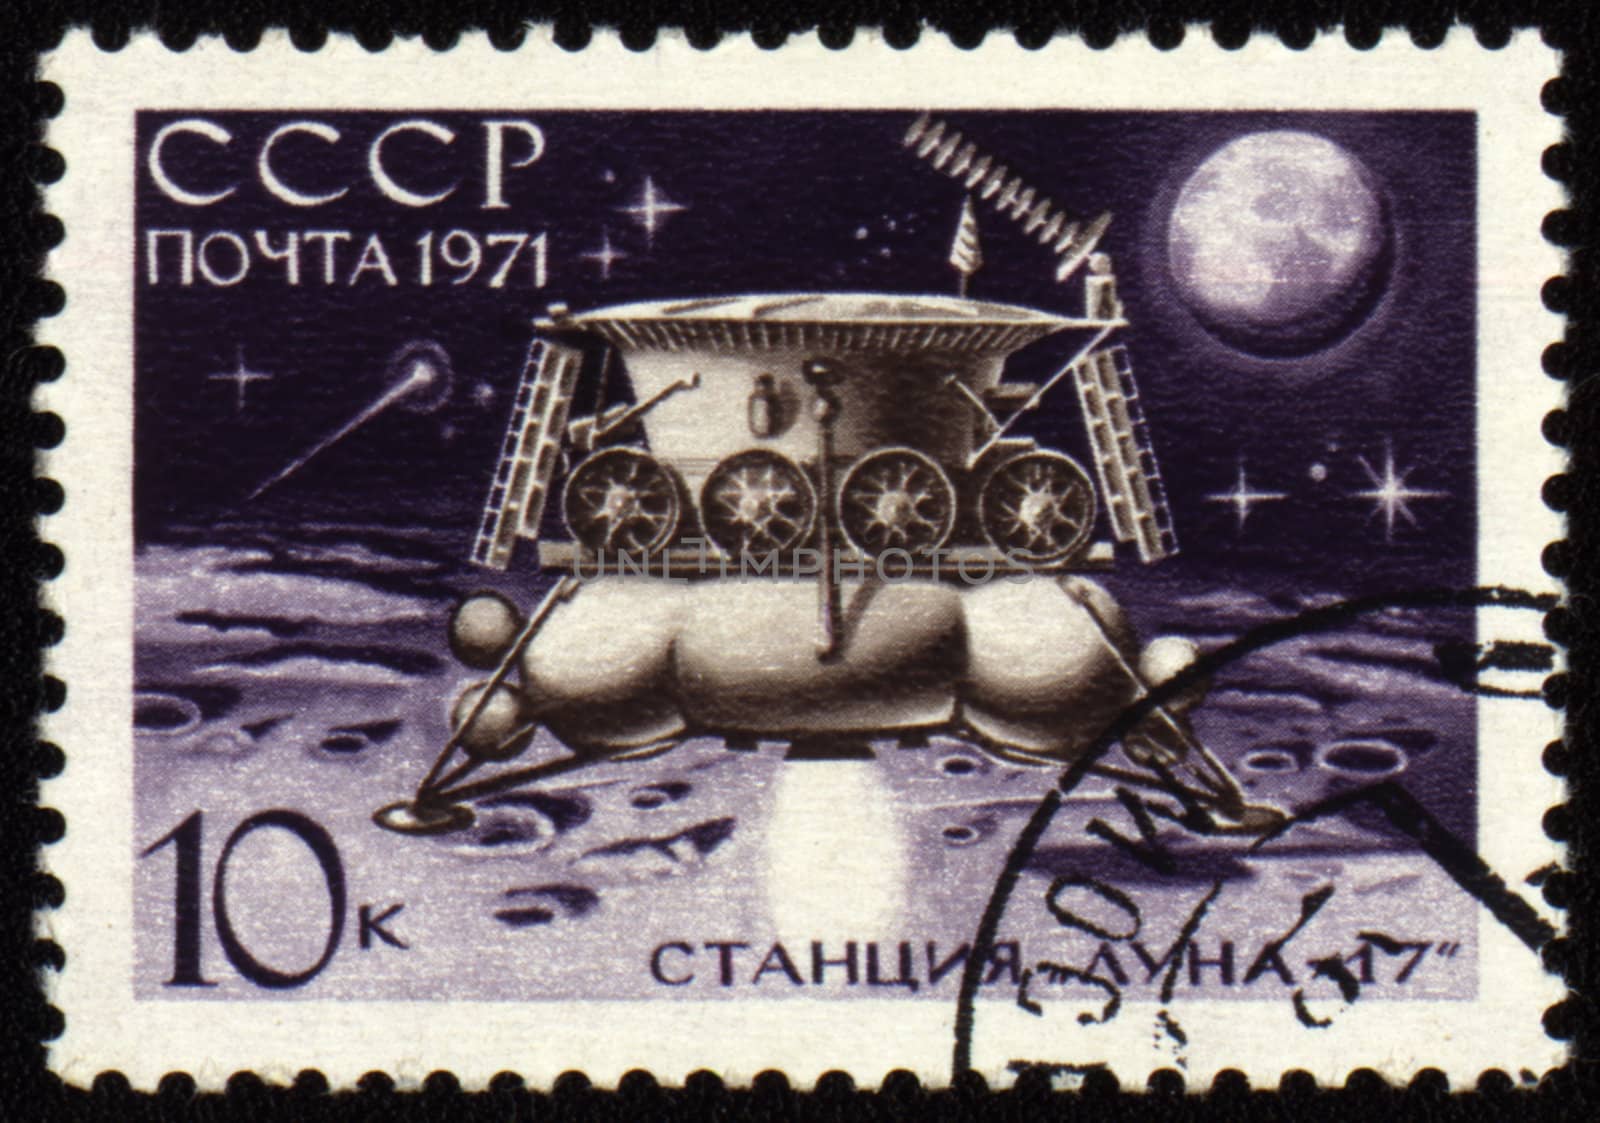 Postage stamp printed in USSR shows soviet automatic station Luna-17, moon-landing on Lunar surface, circa 1971